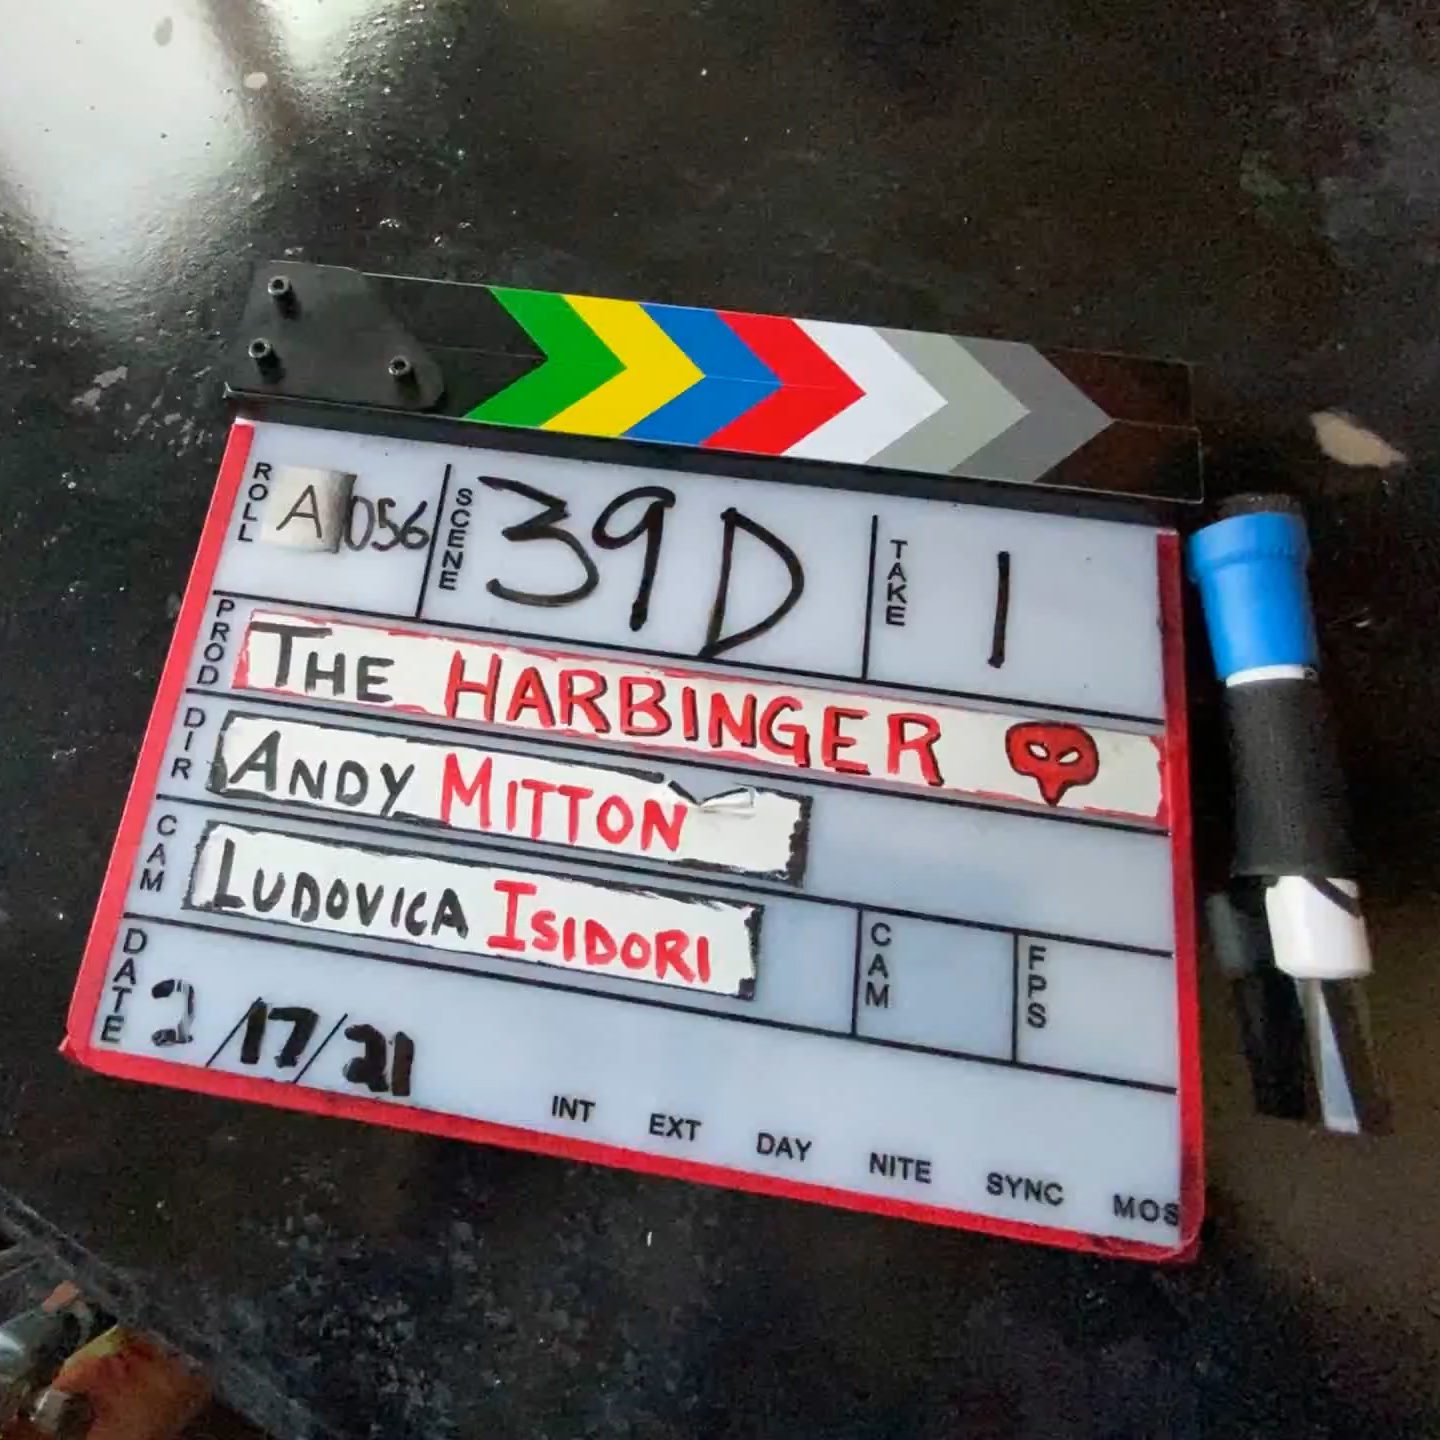 A clapperboard for the film "The Harbinger."